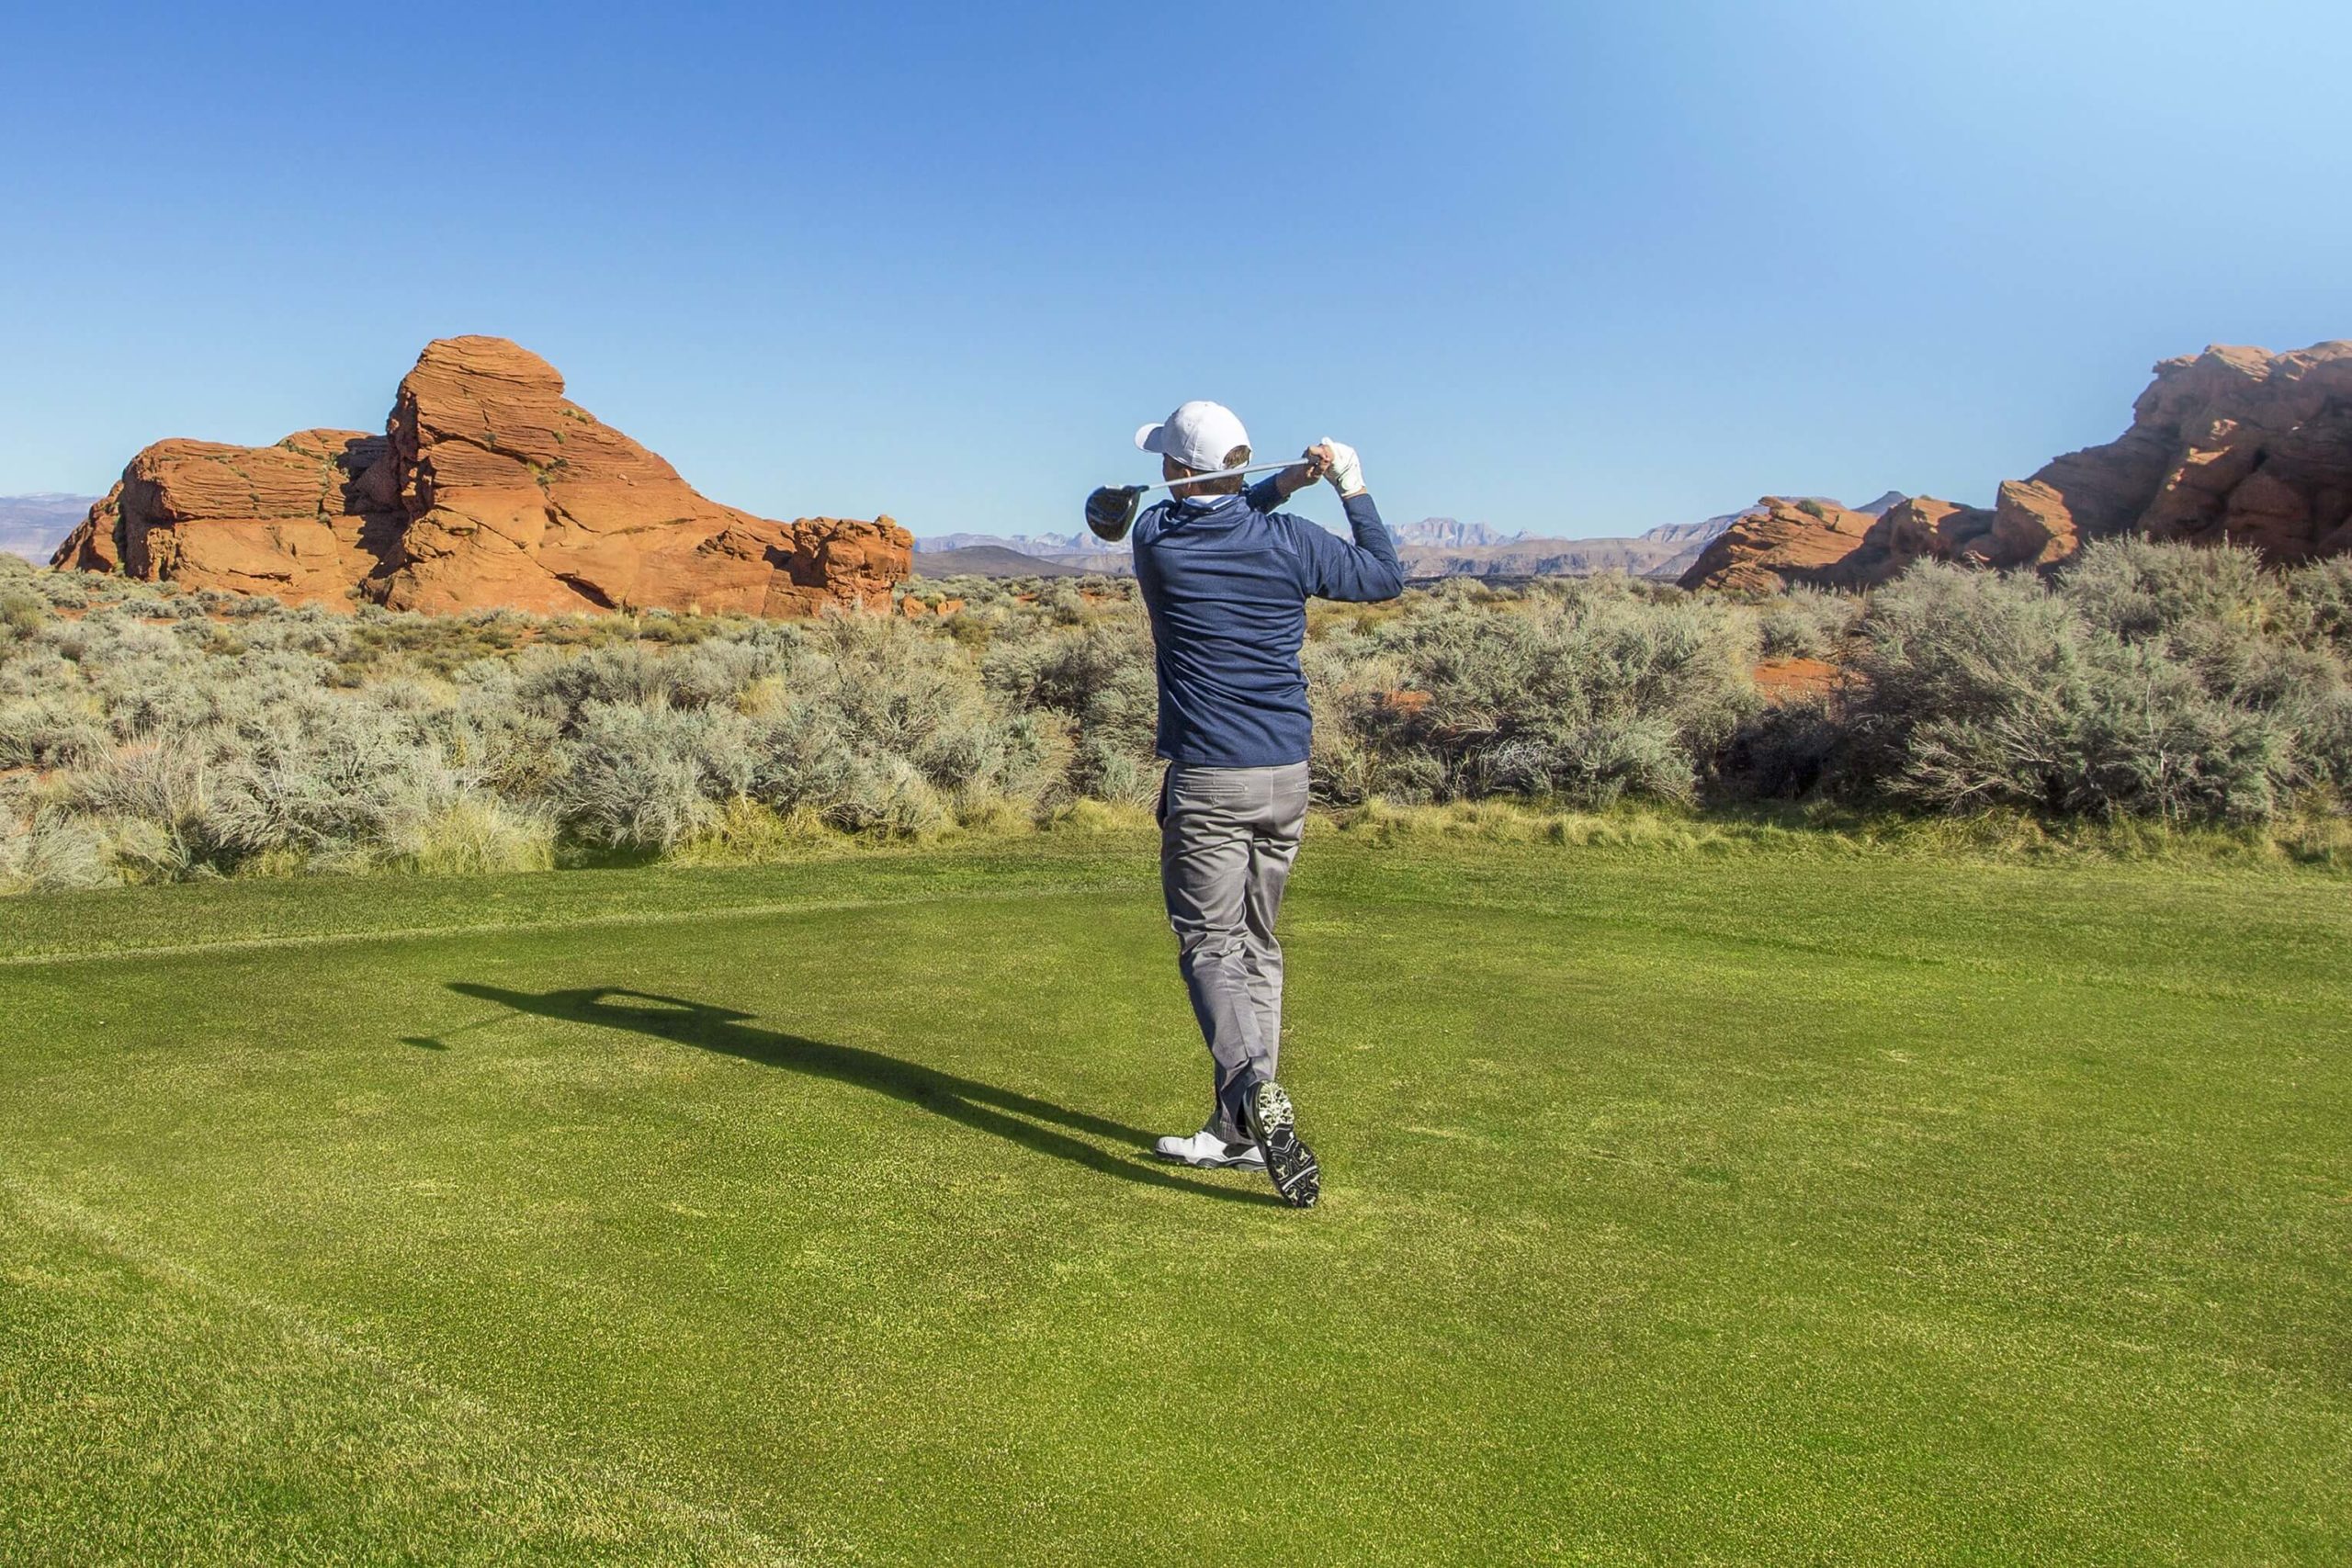 See The Phoenix Open Golf Tournament And More In Arizona Five Star